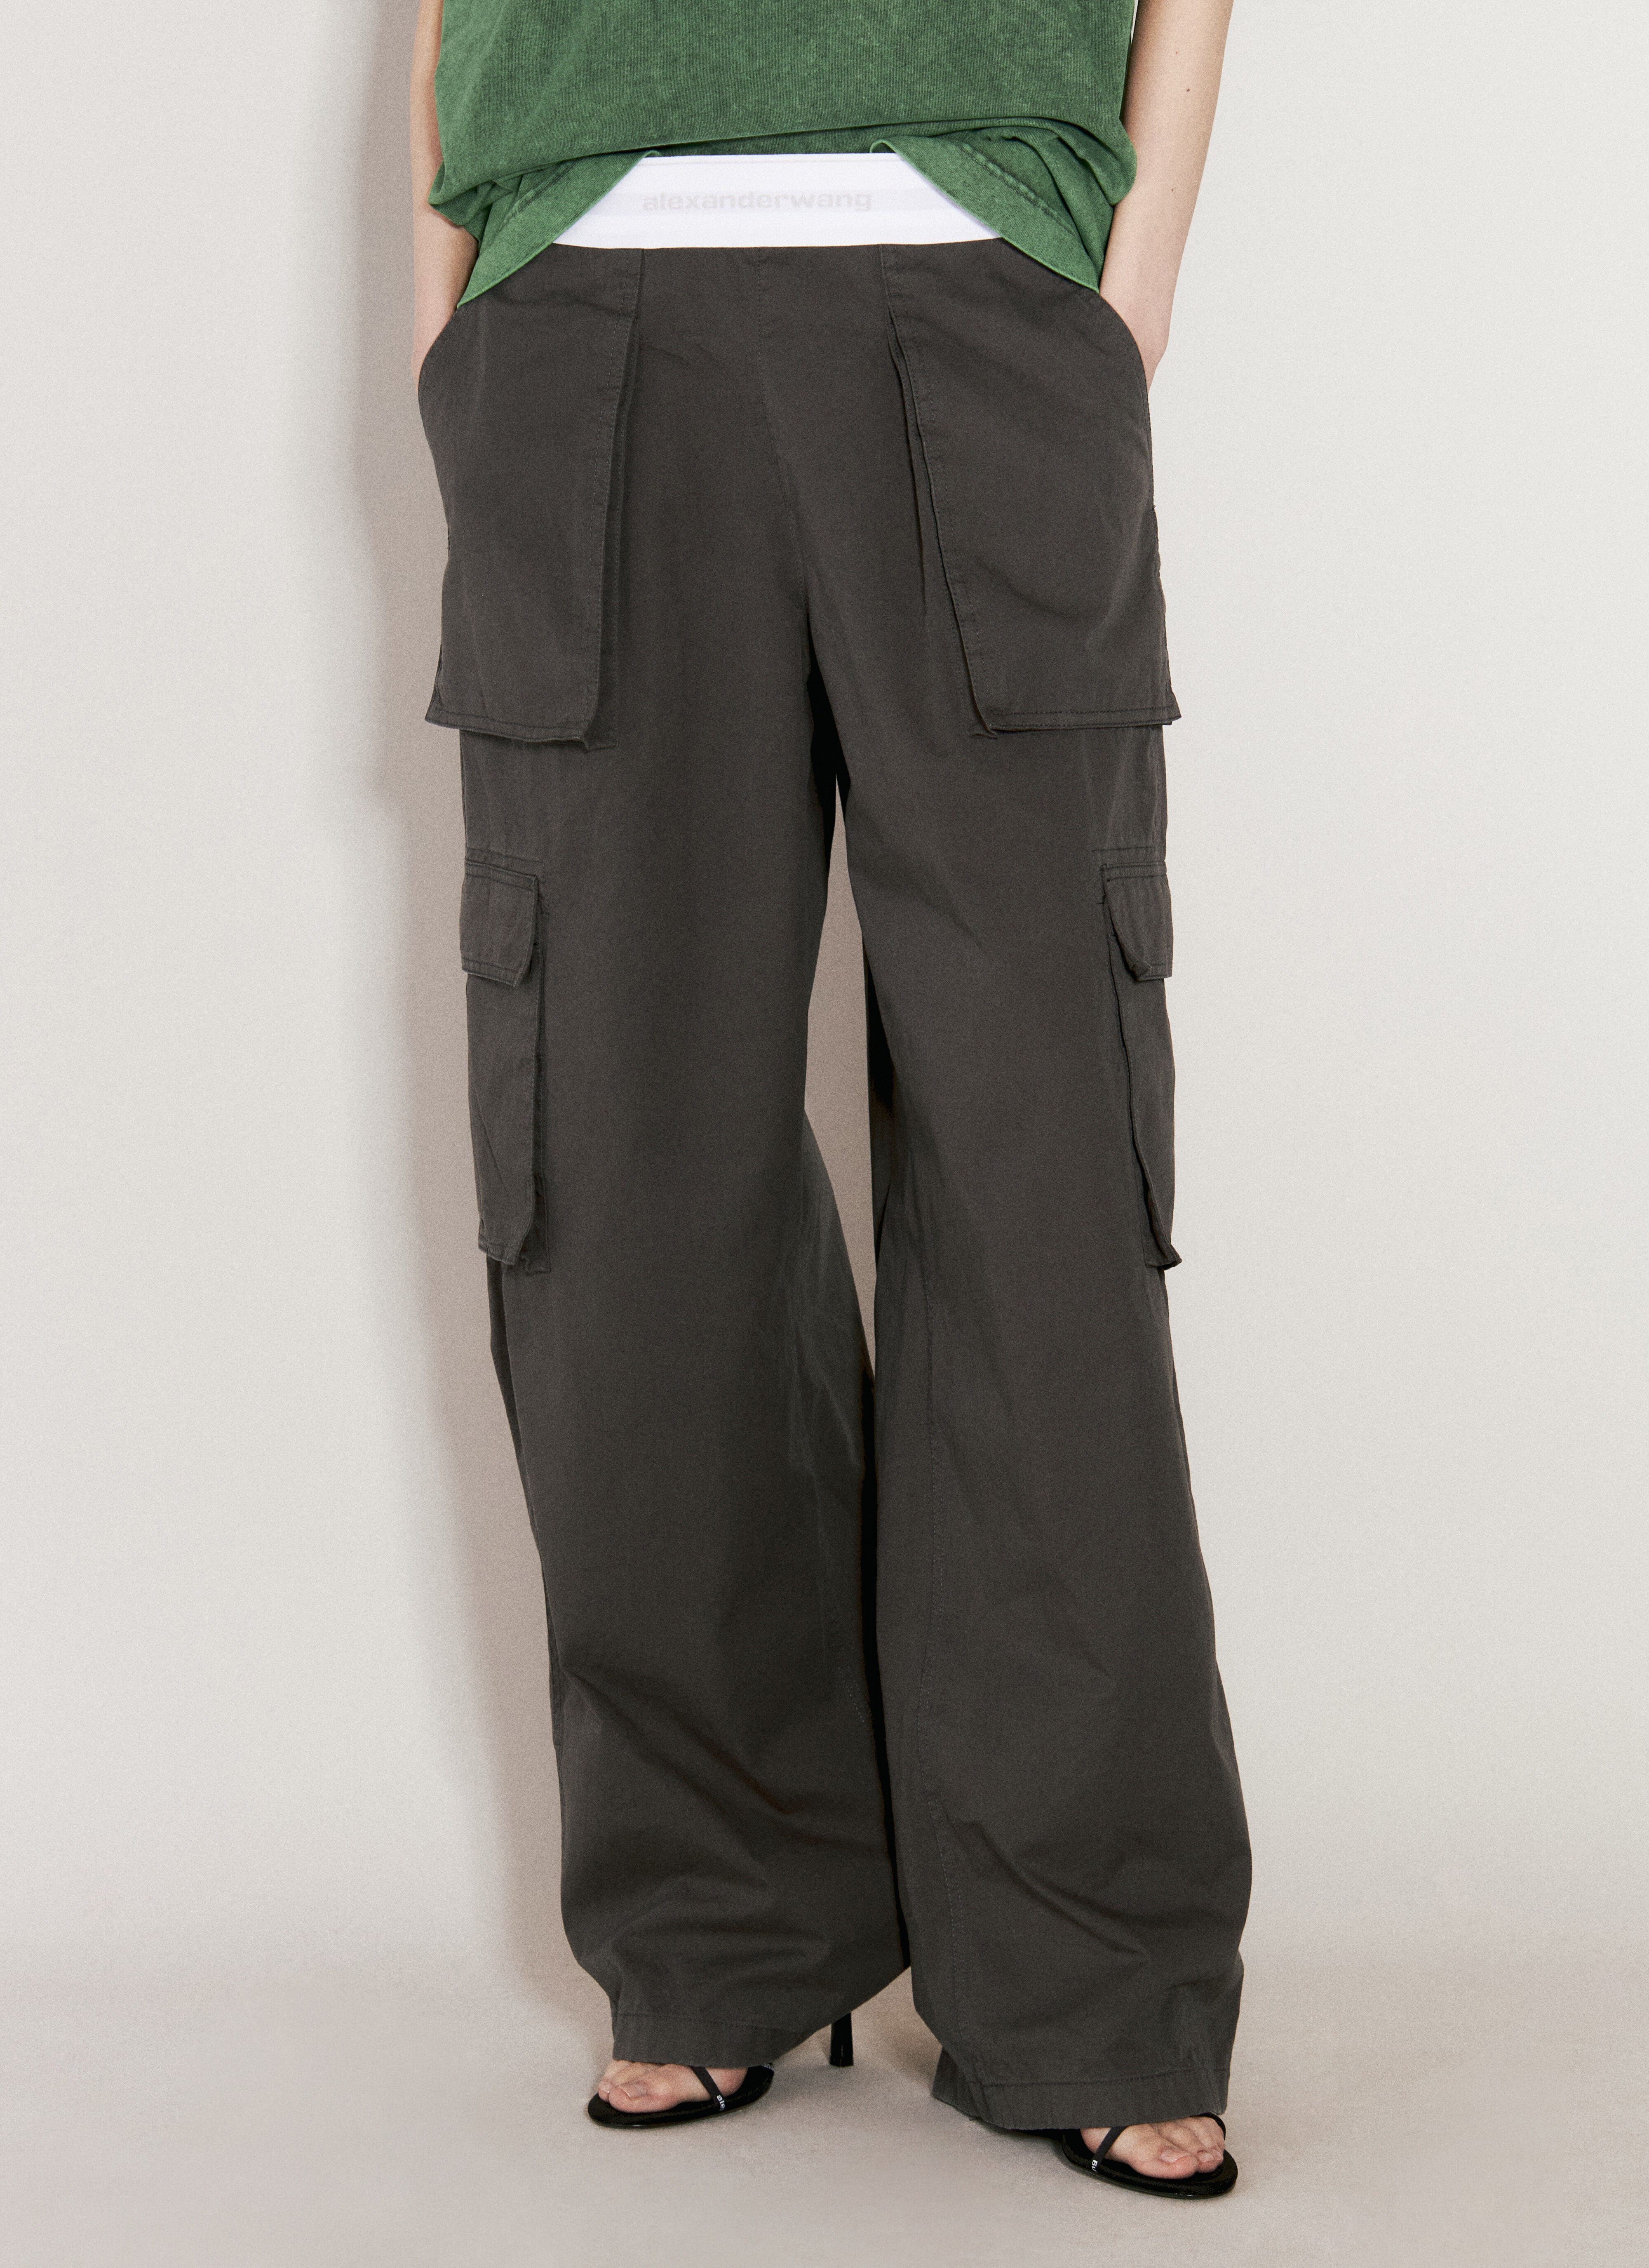 Space Available Cargo Rave Pants Black spa0354016